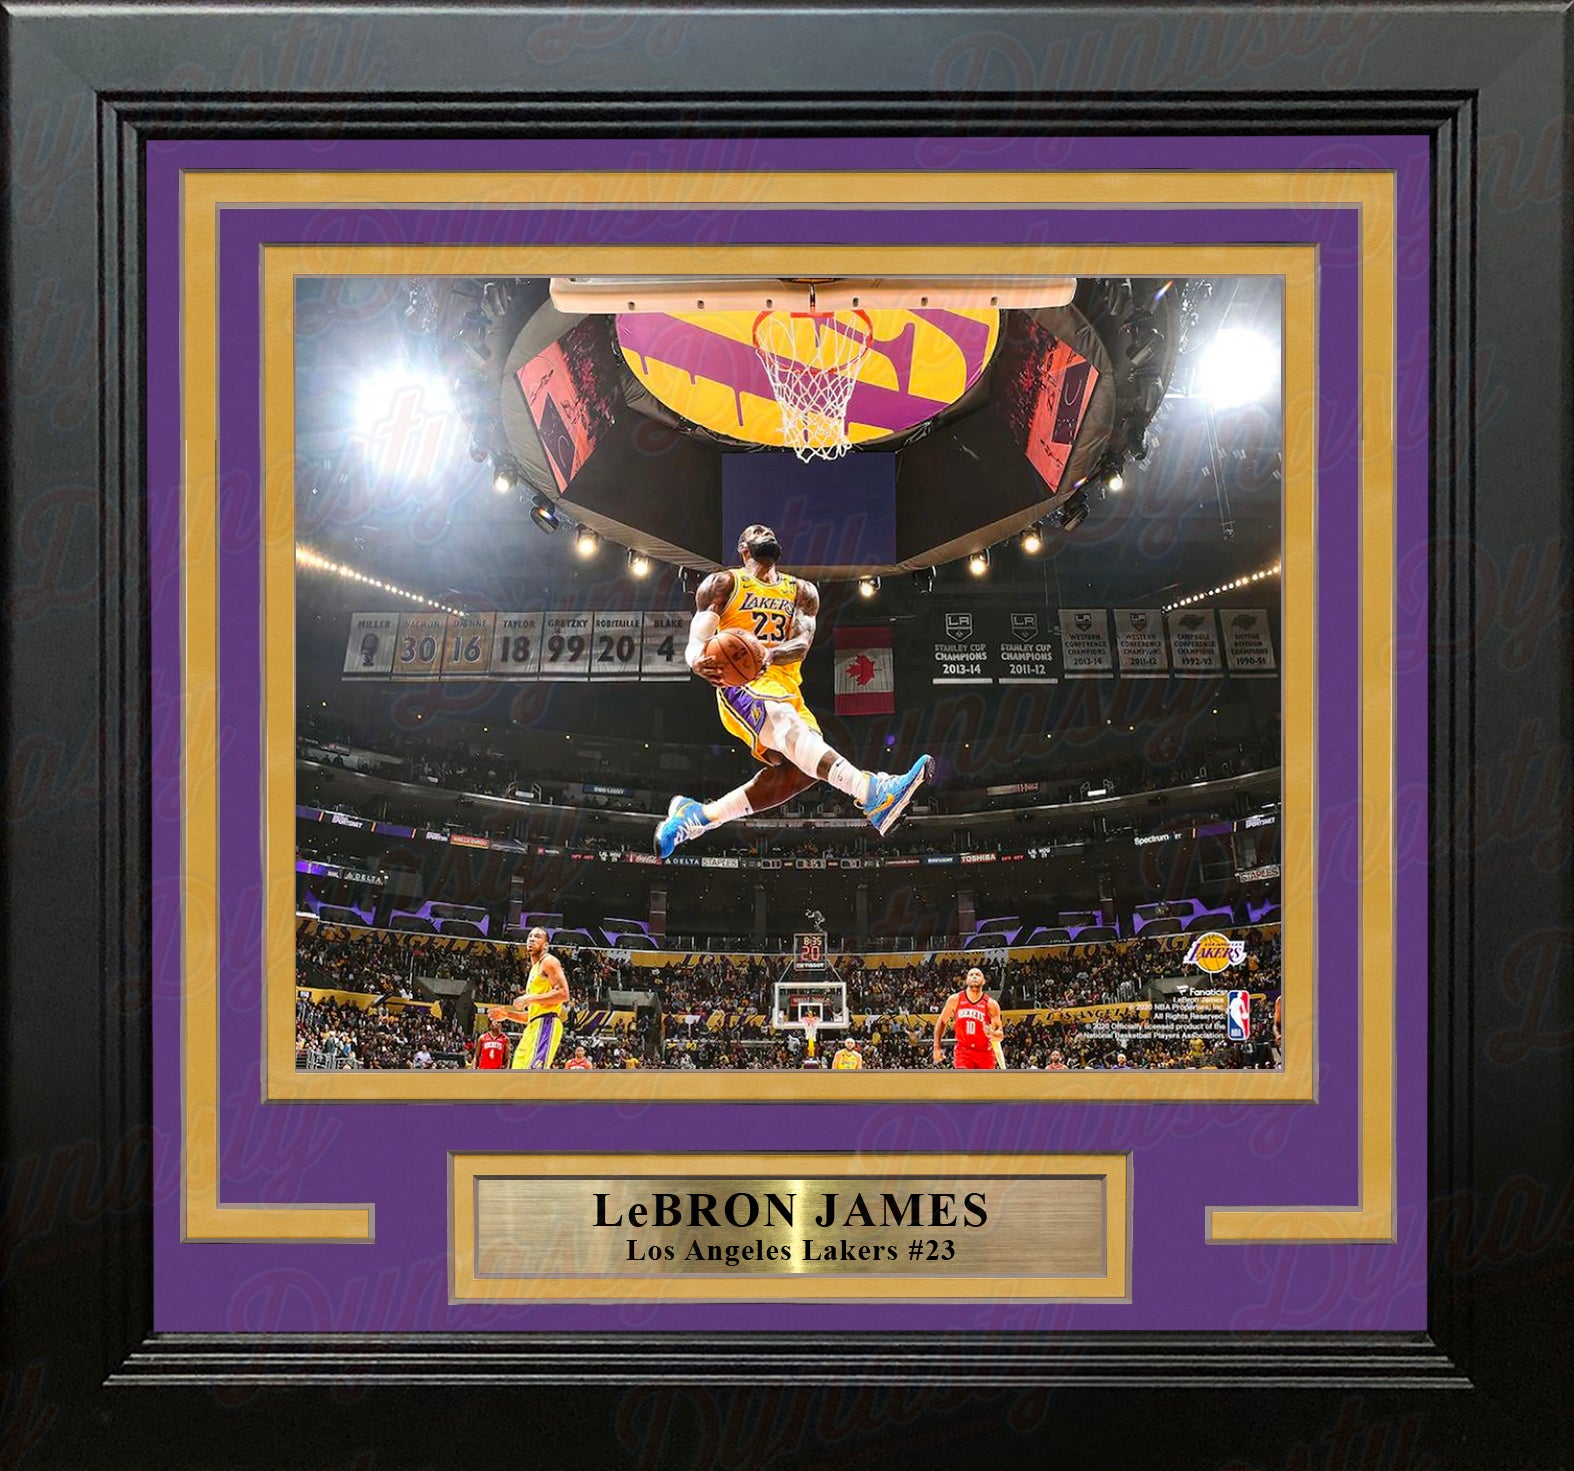 LeBron James Aerial Dunk Los Angeles Lakers 8" x 10" Framed Basketball Photo - Dynasty Sports & Framing 